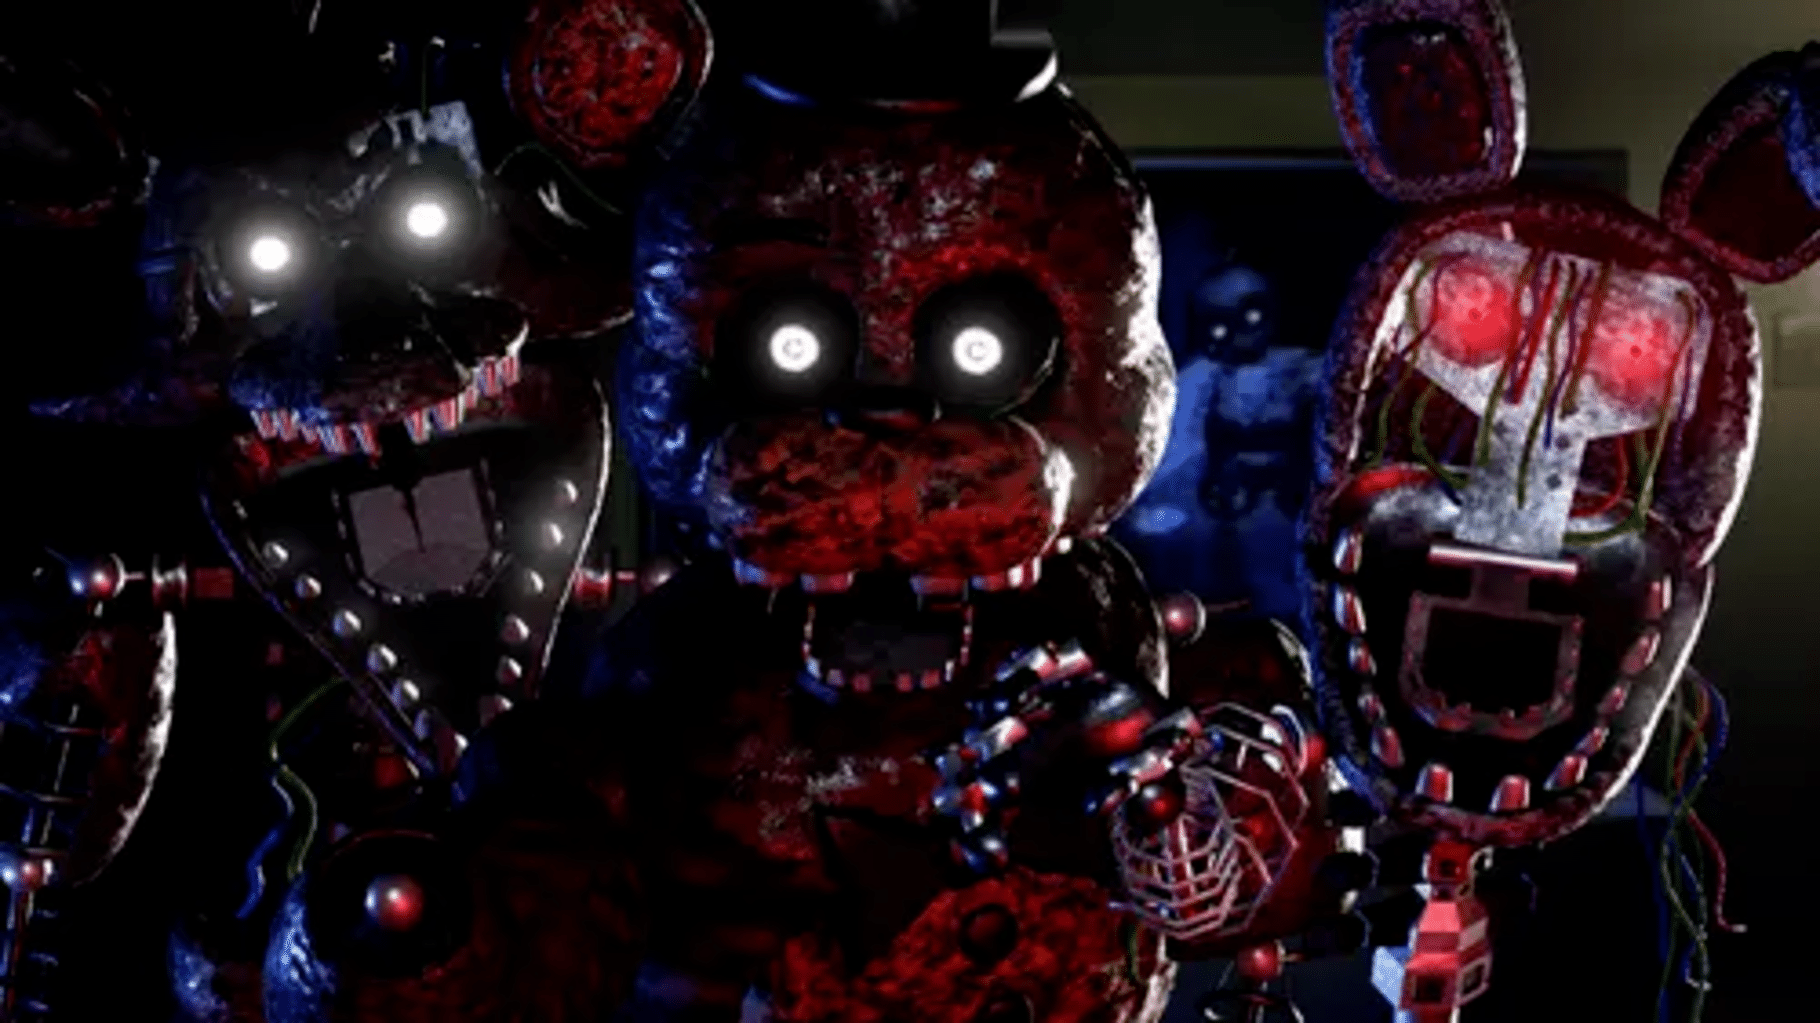 The Joy of Creation: Story Mode, Five Nights at Freddy's Wiki